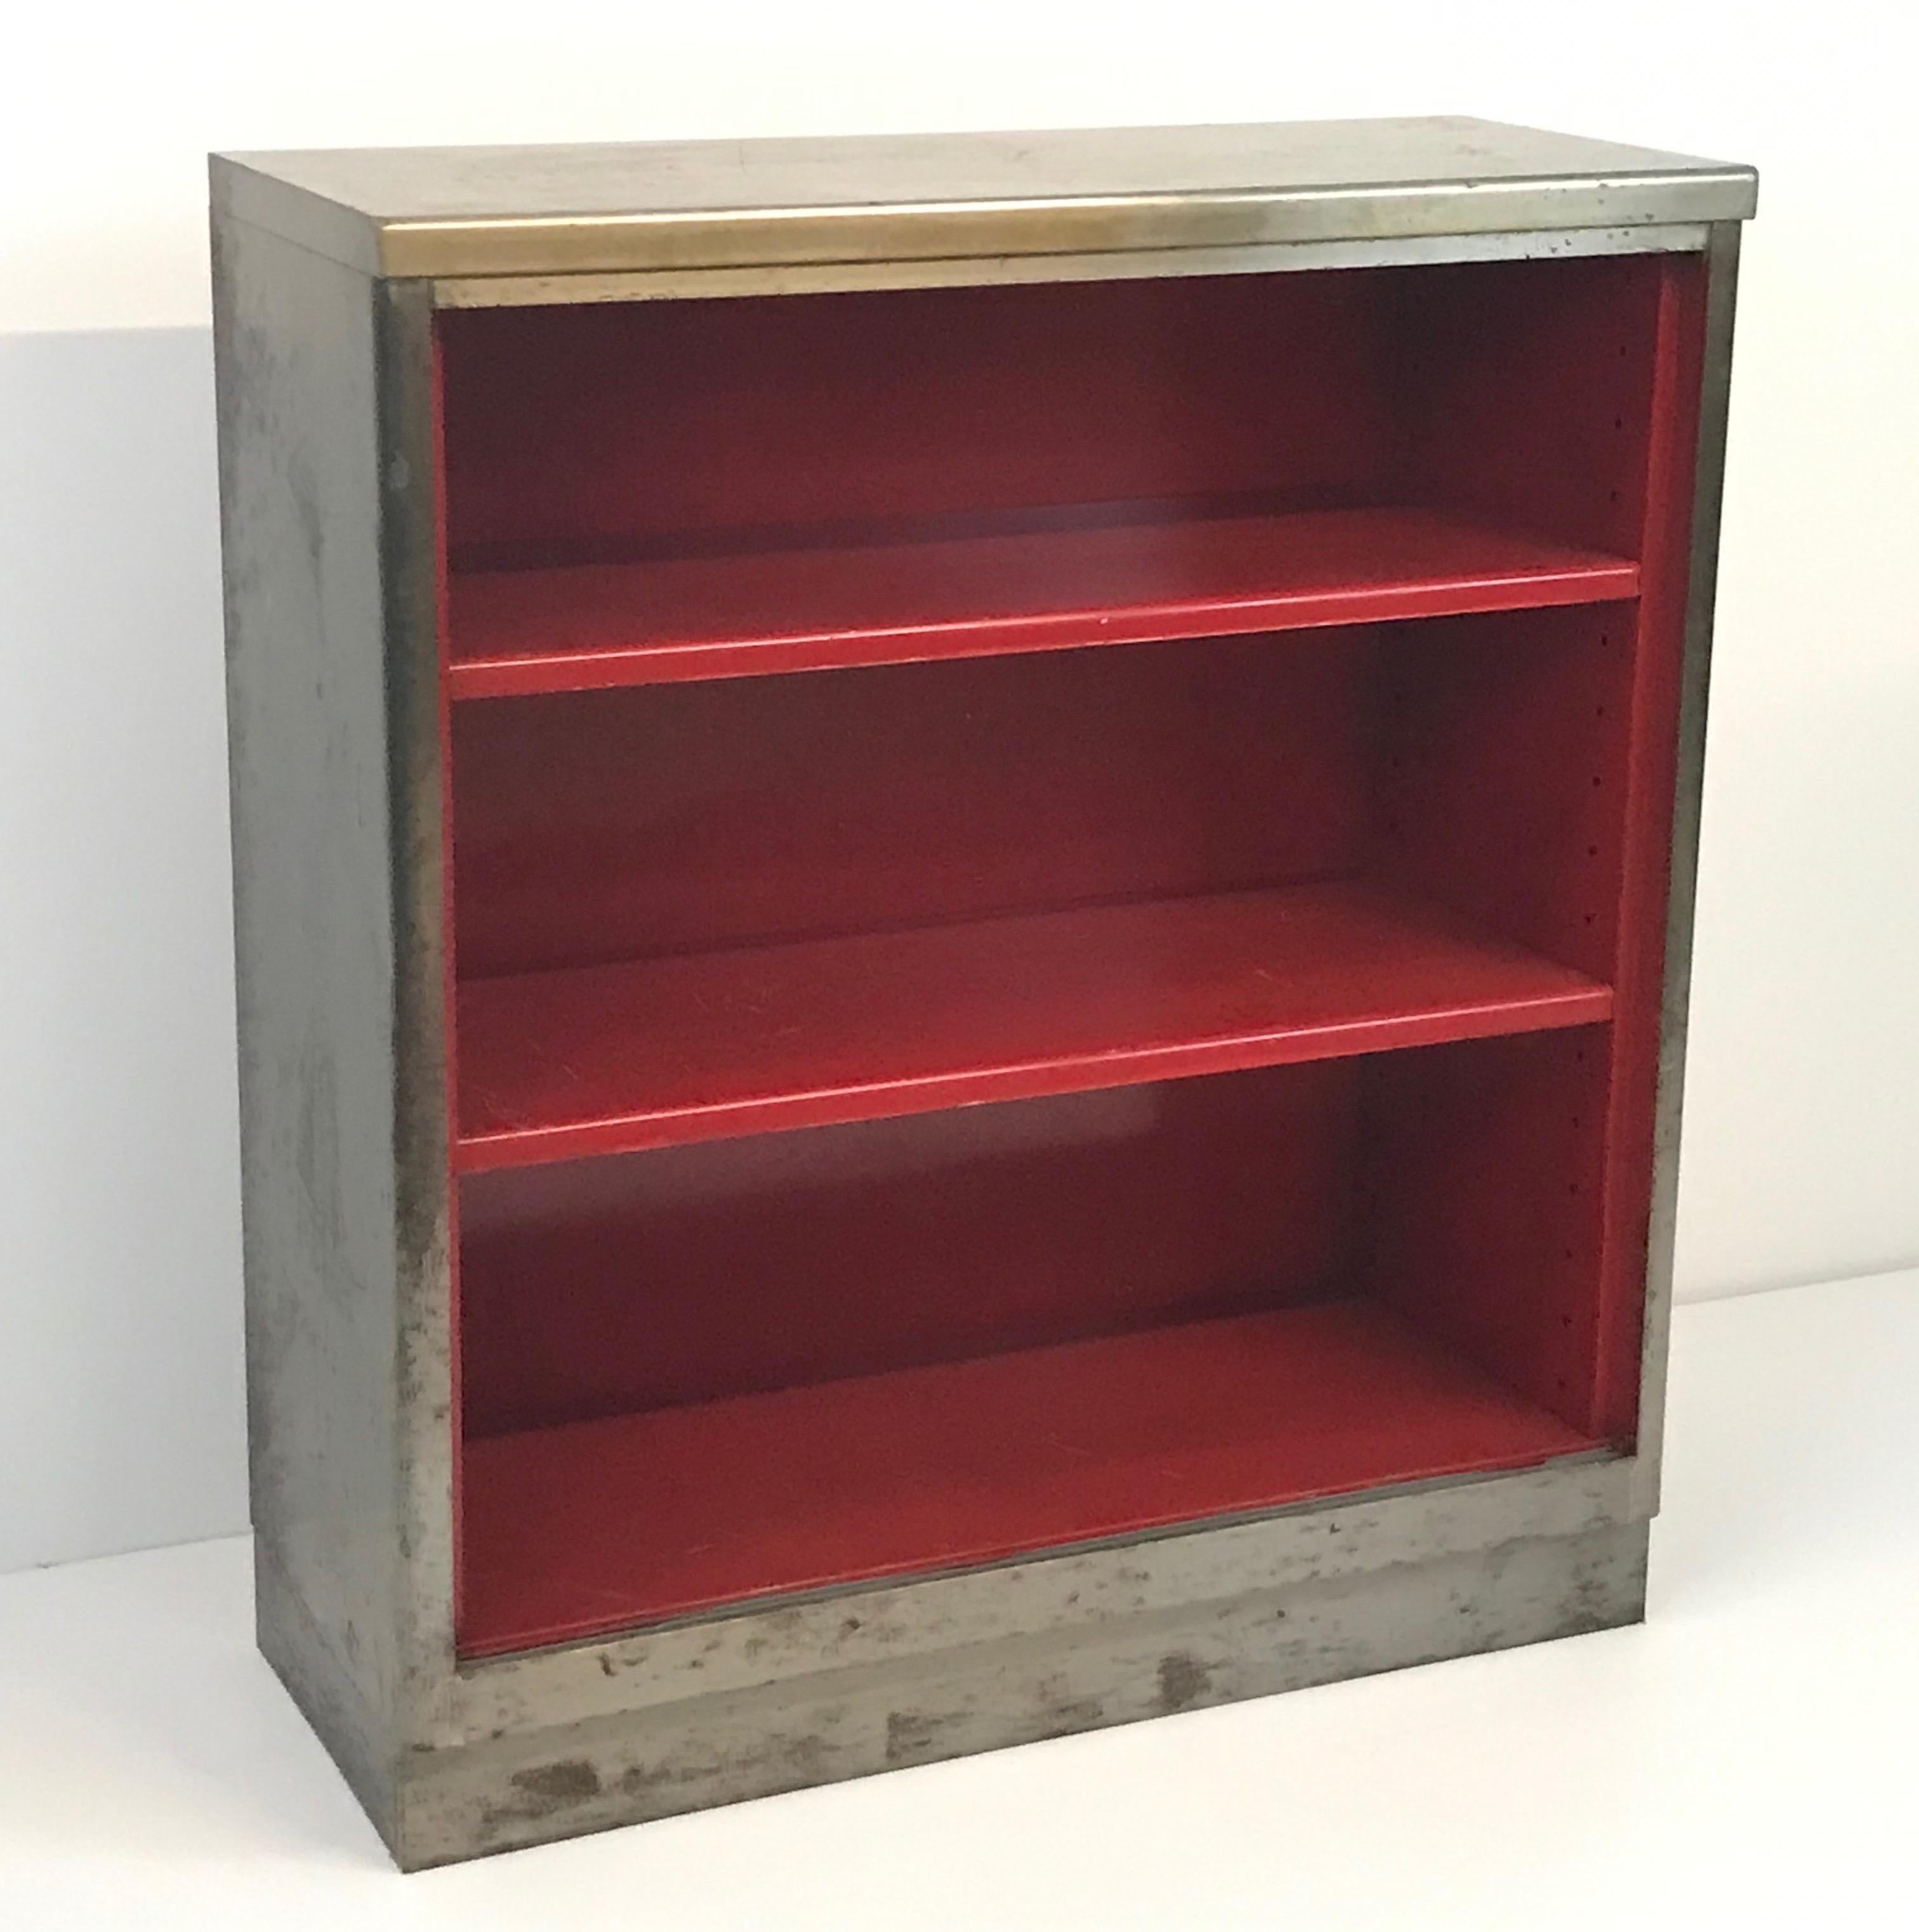 Vintage Art Metal Inc Steel Three Shelf Book Case with Bright Red Interior For Sale